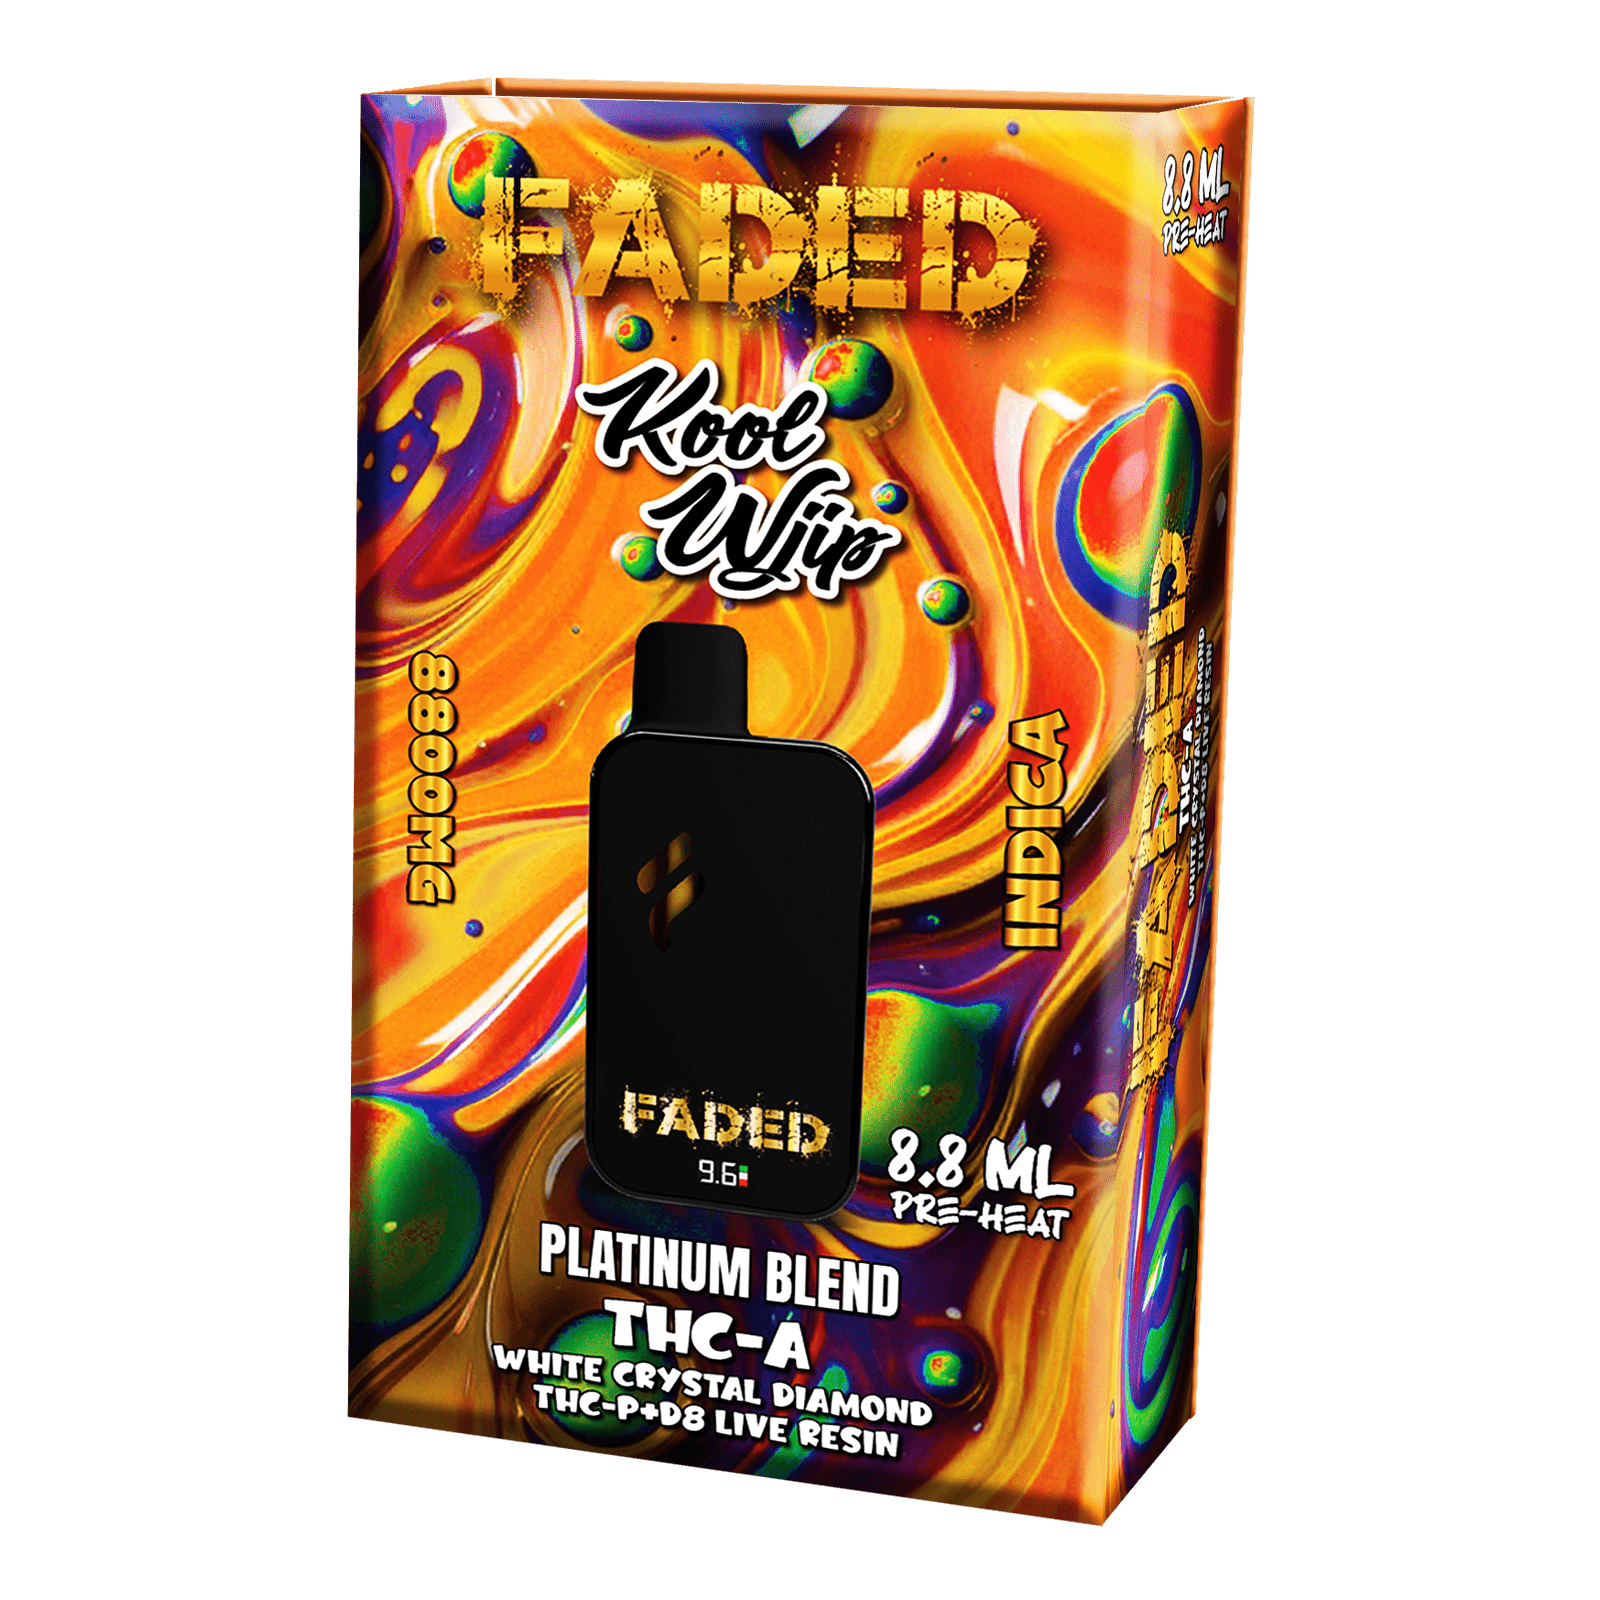 FADED PLATINUM BLEND THC-A 8.8ML DISPOSABLES | KOOL WHIP